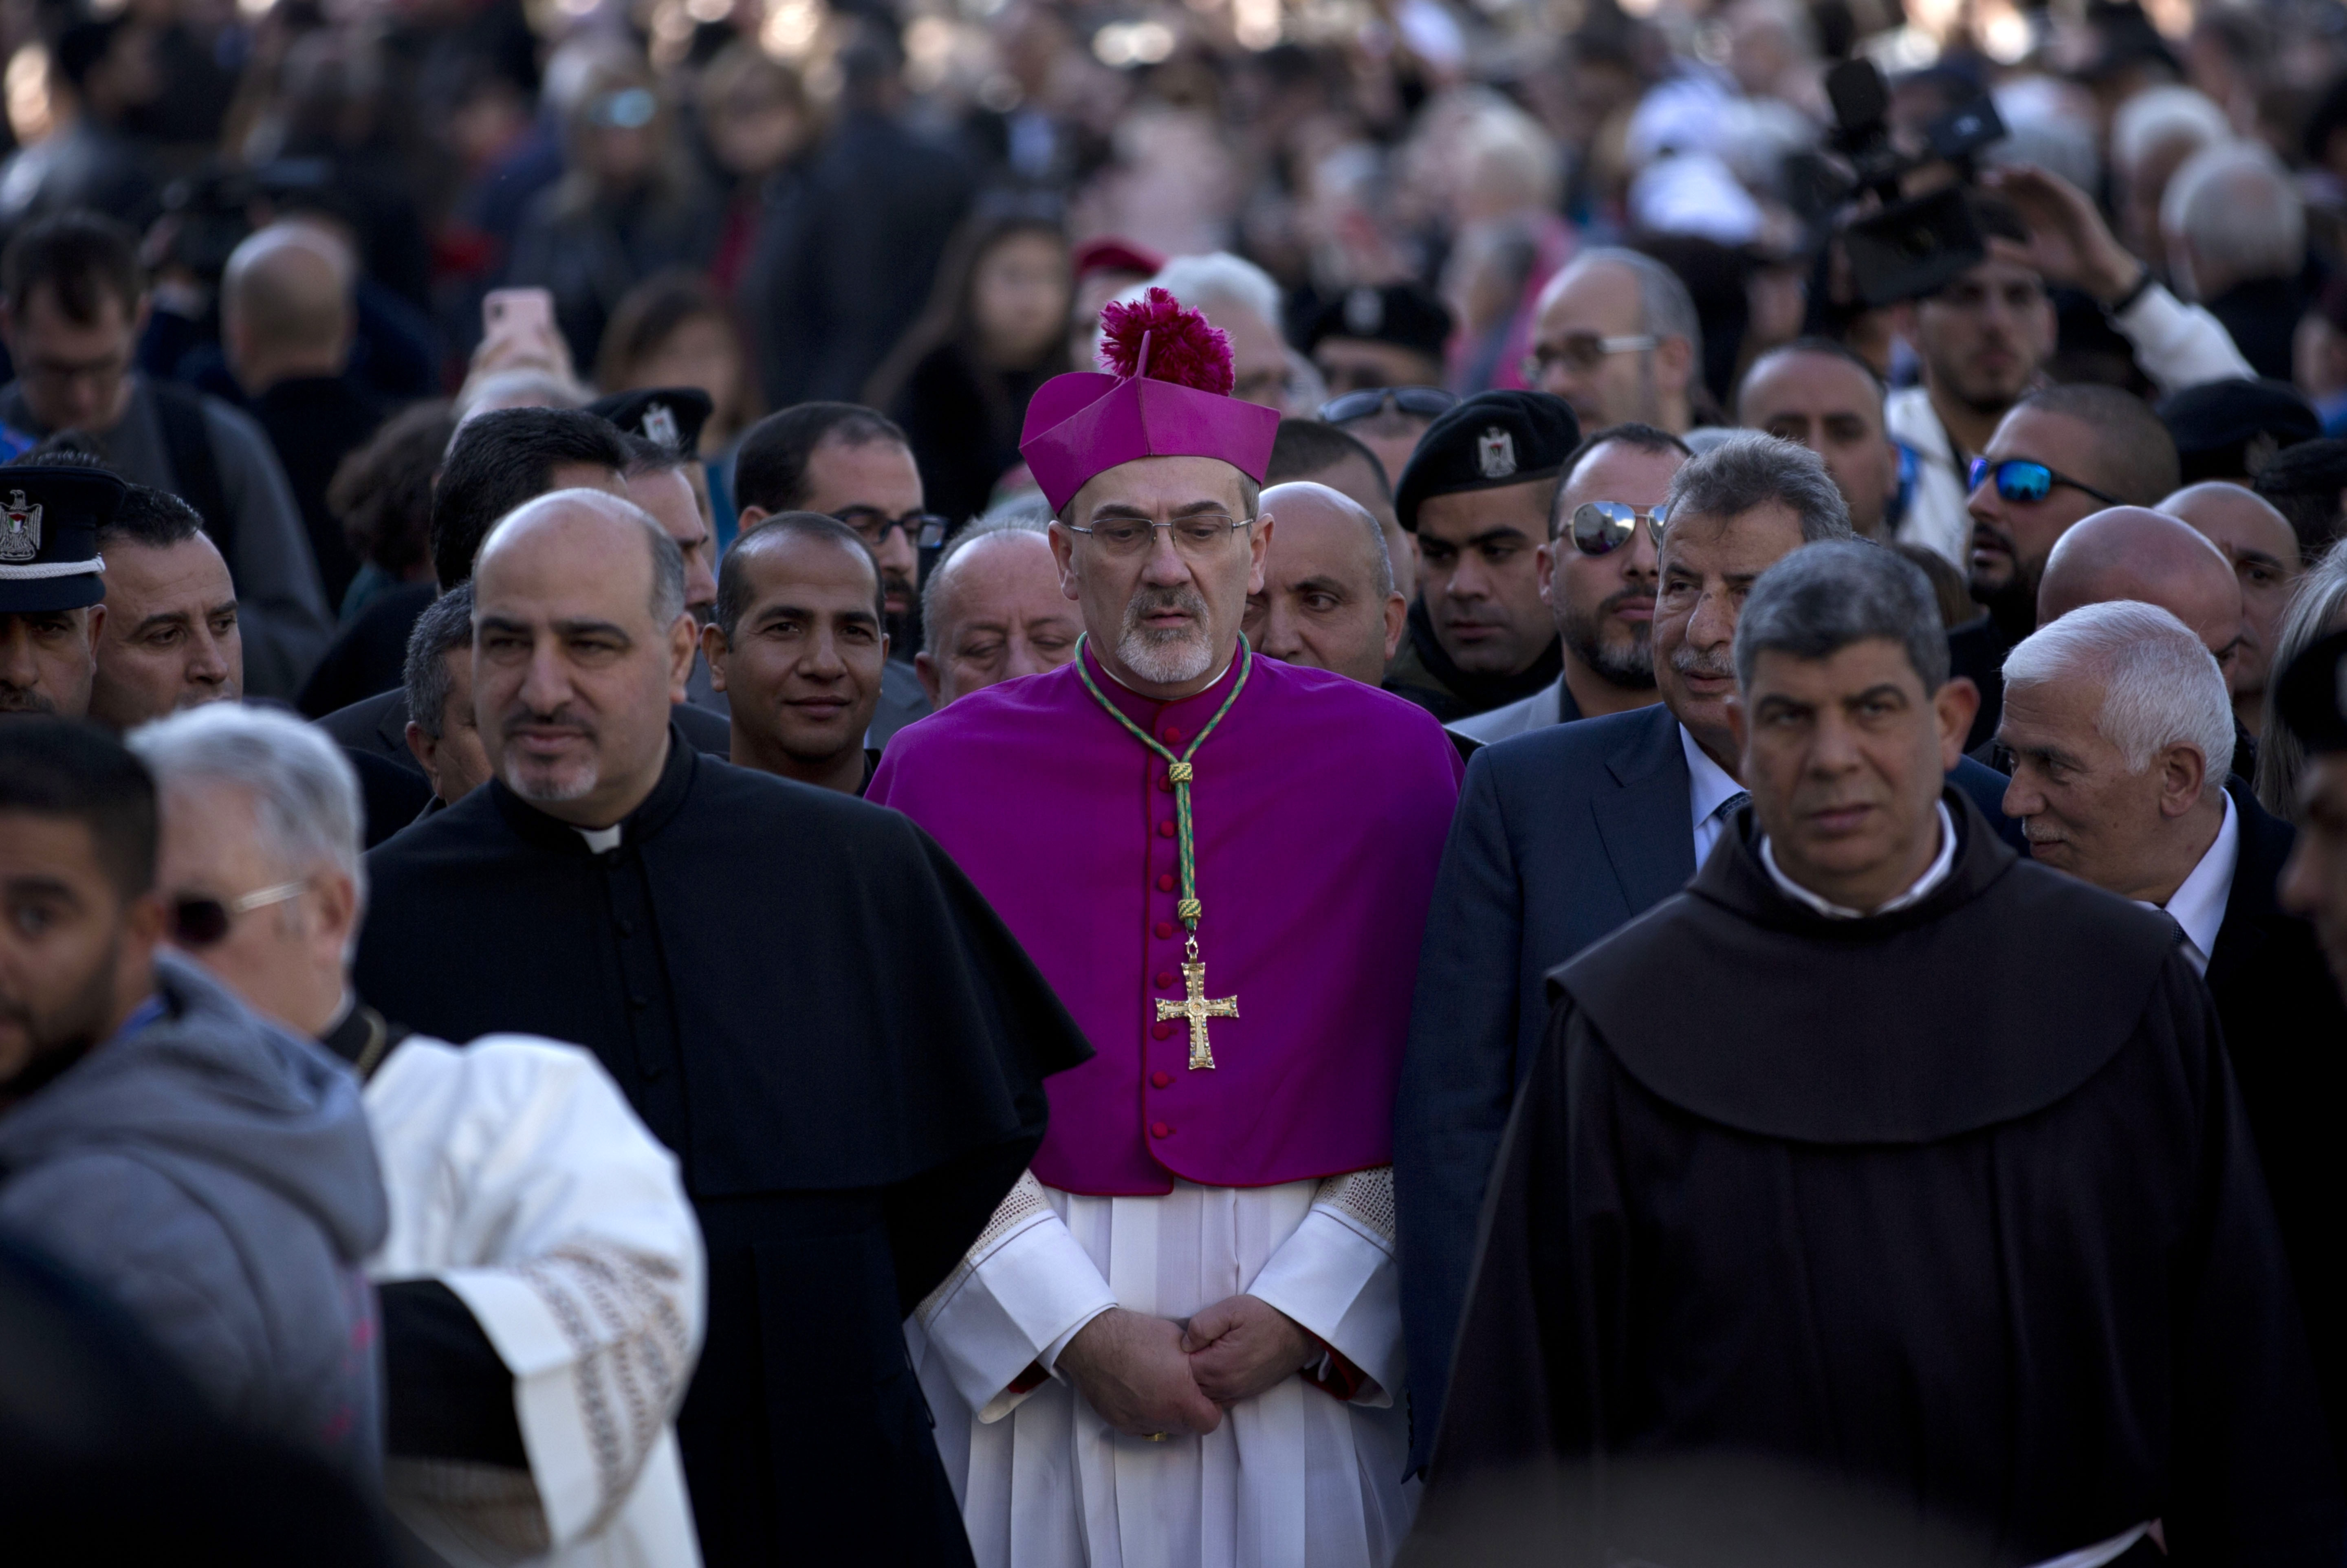 The Latin Patriarch of Jerusalem Pierbattista Pizzaballa arrives to the Church of the Nativity, built atop the site where Christians believe Jesus Christ was born, on Christmas Eve, in the West Bank City of Bethlehem, Tuesday, Dec. 24, 2019. (AP Photo/Majdi Mohammed)